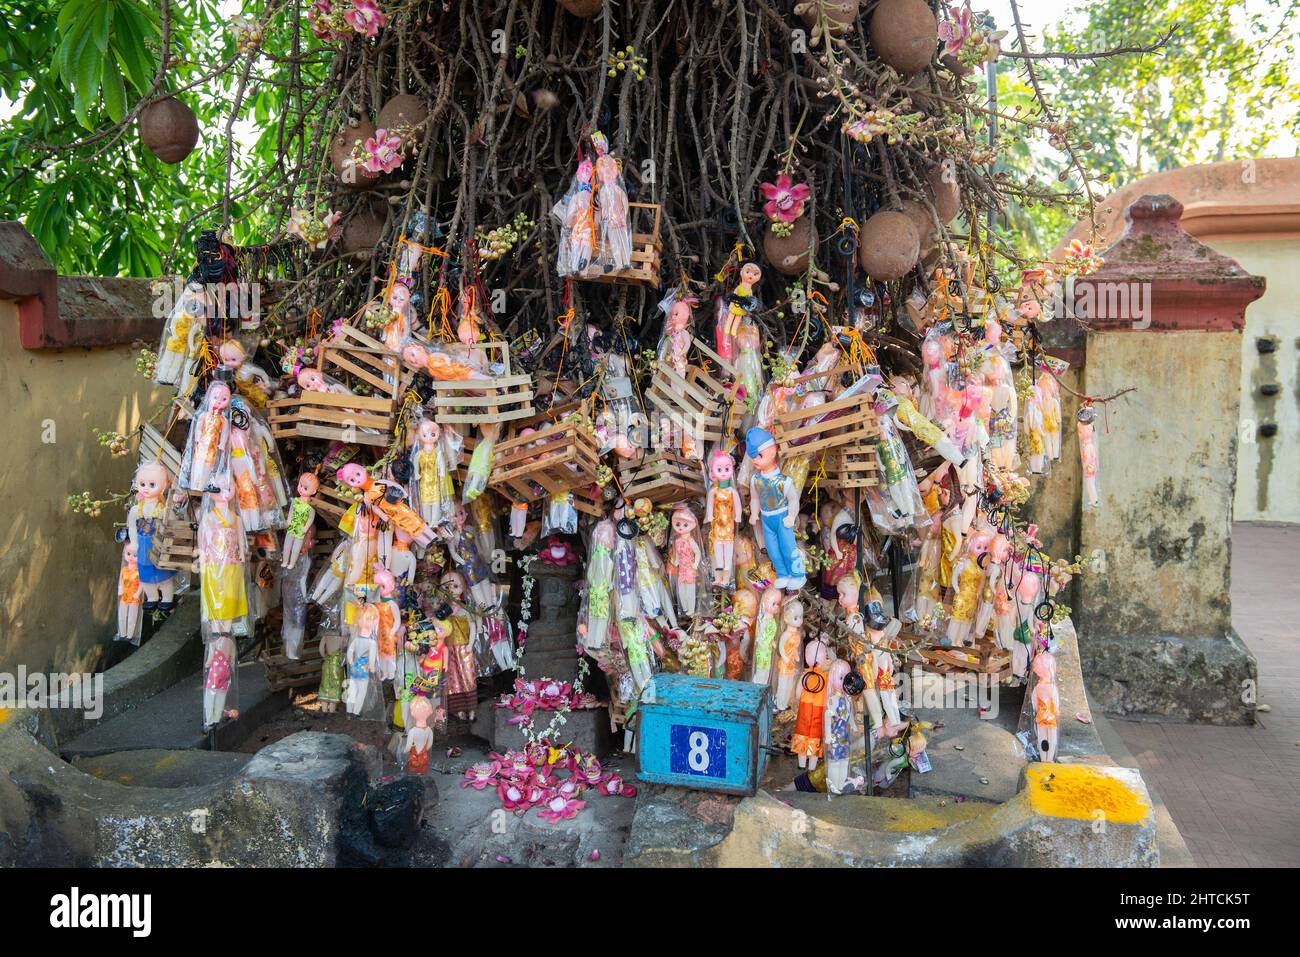 Varkala, India - January 2022: Wishing tree in Janardanaswamy Temple. Many dolls and boxes are hanging in a tree inside the temple, as offering from w Stock Photo